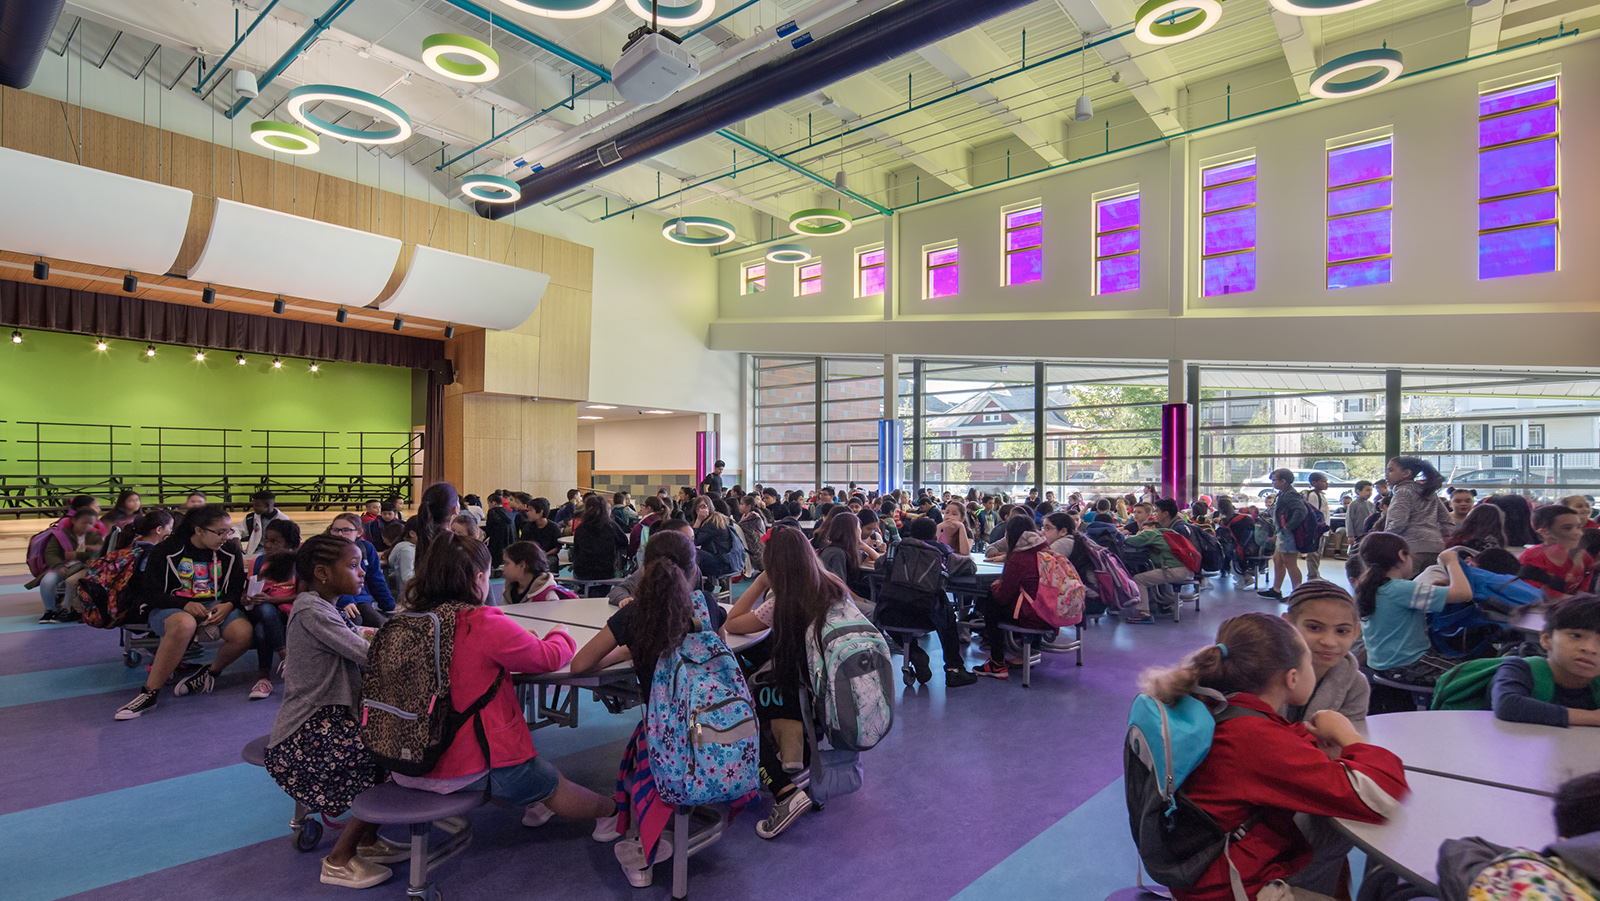 Irwin Jacobs Elementary School Interior, cafeteria during lunch time